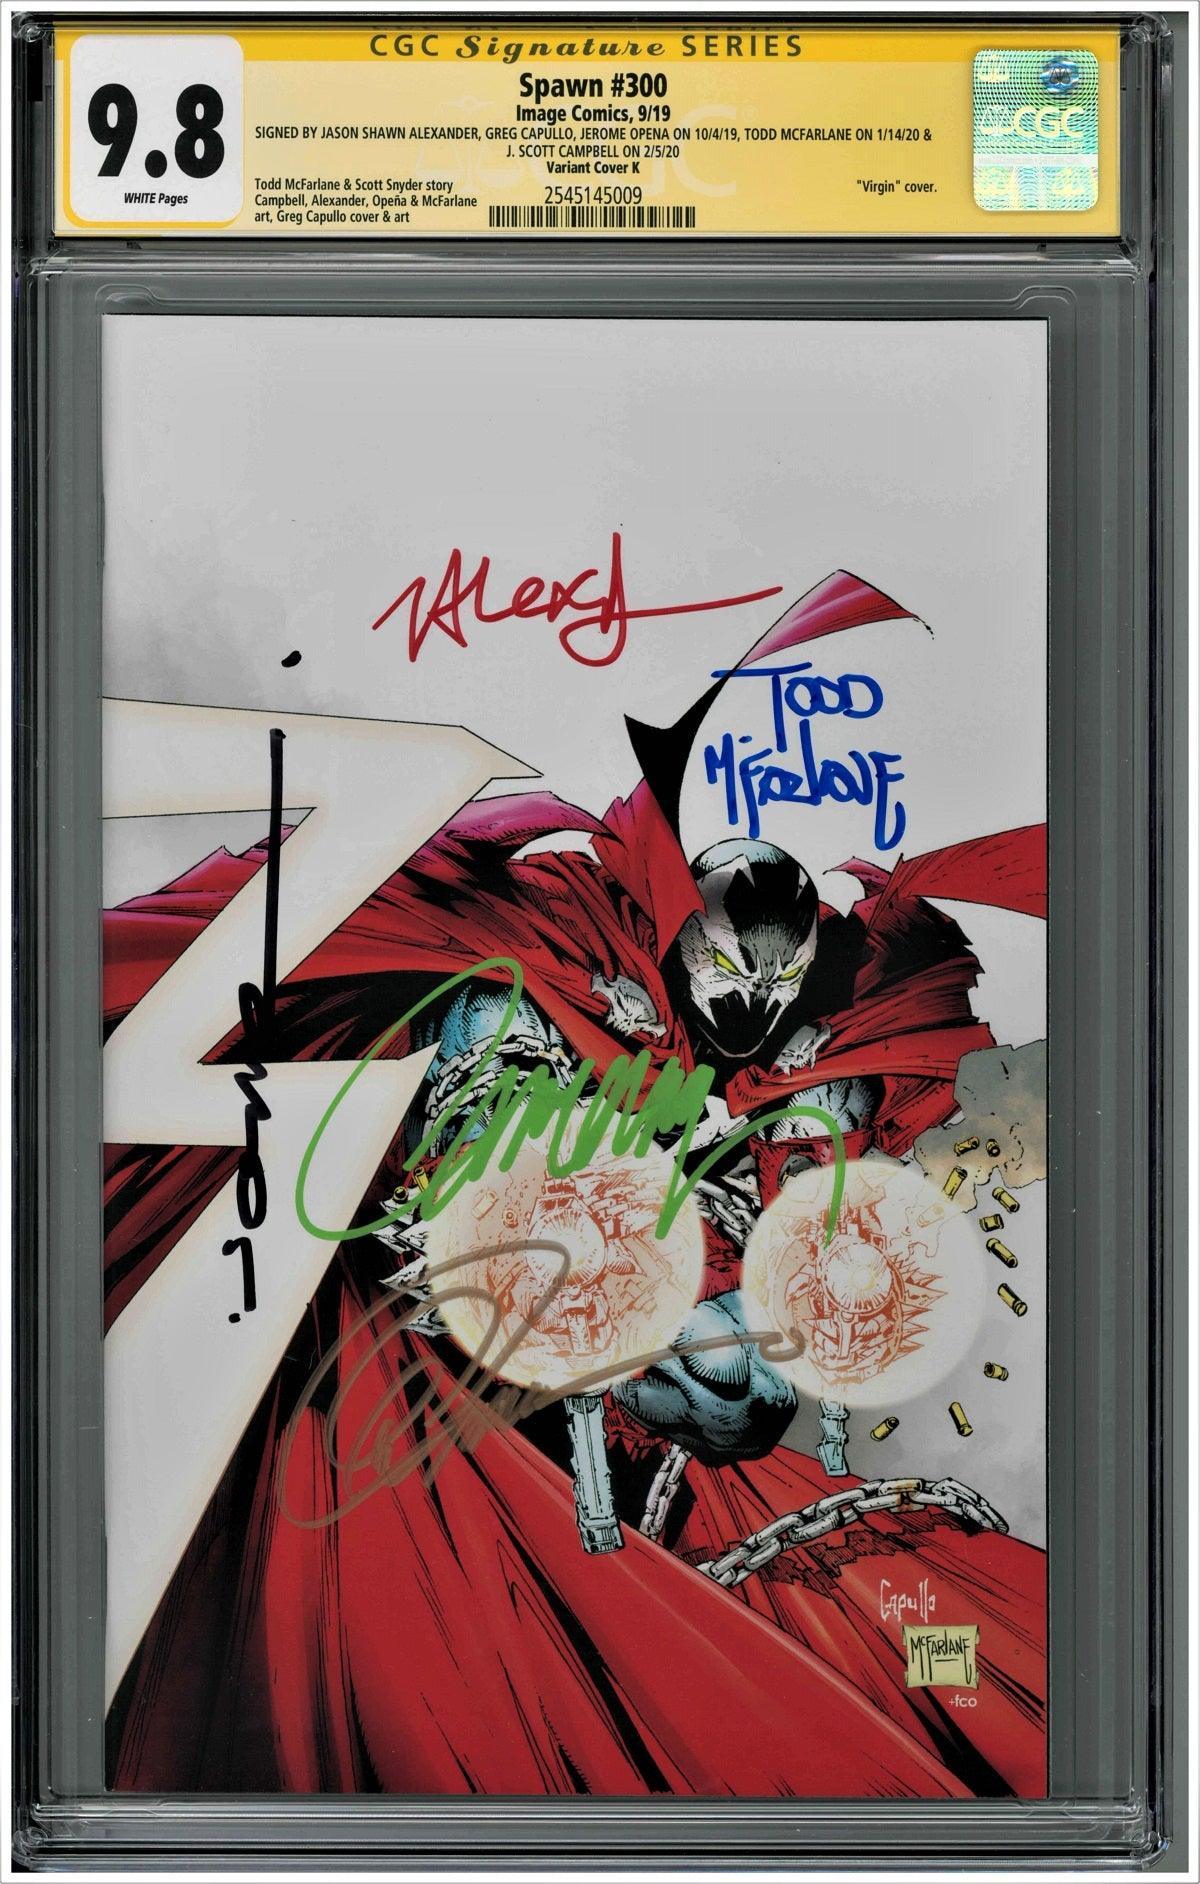 CGC SPAWN #300 VARIANT COVER K (9.8) SS - SIGNED BY MCFARLANE, CAMPBELL, CAPULLO, ALEXANDER & OPENA - Kings Comics